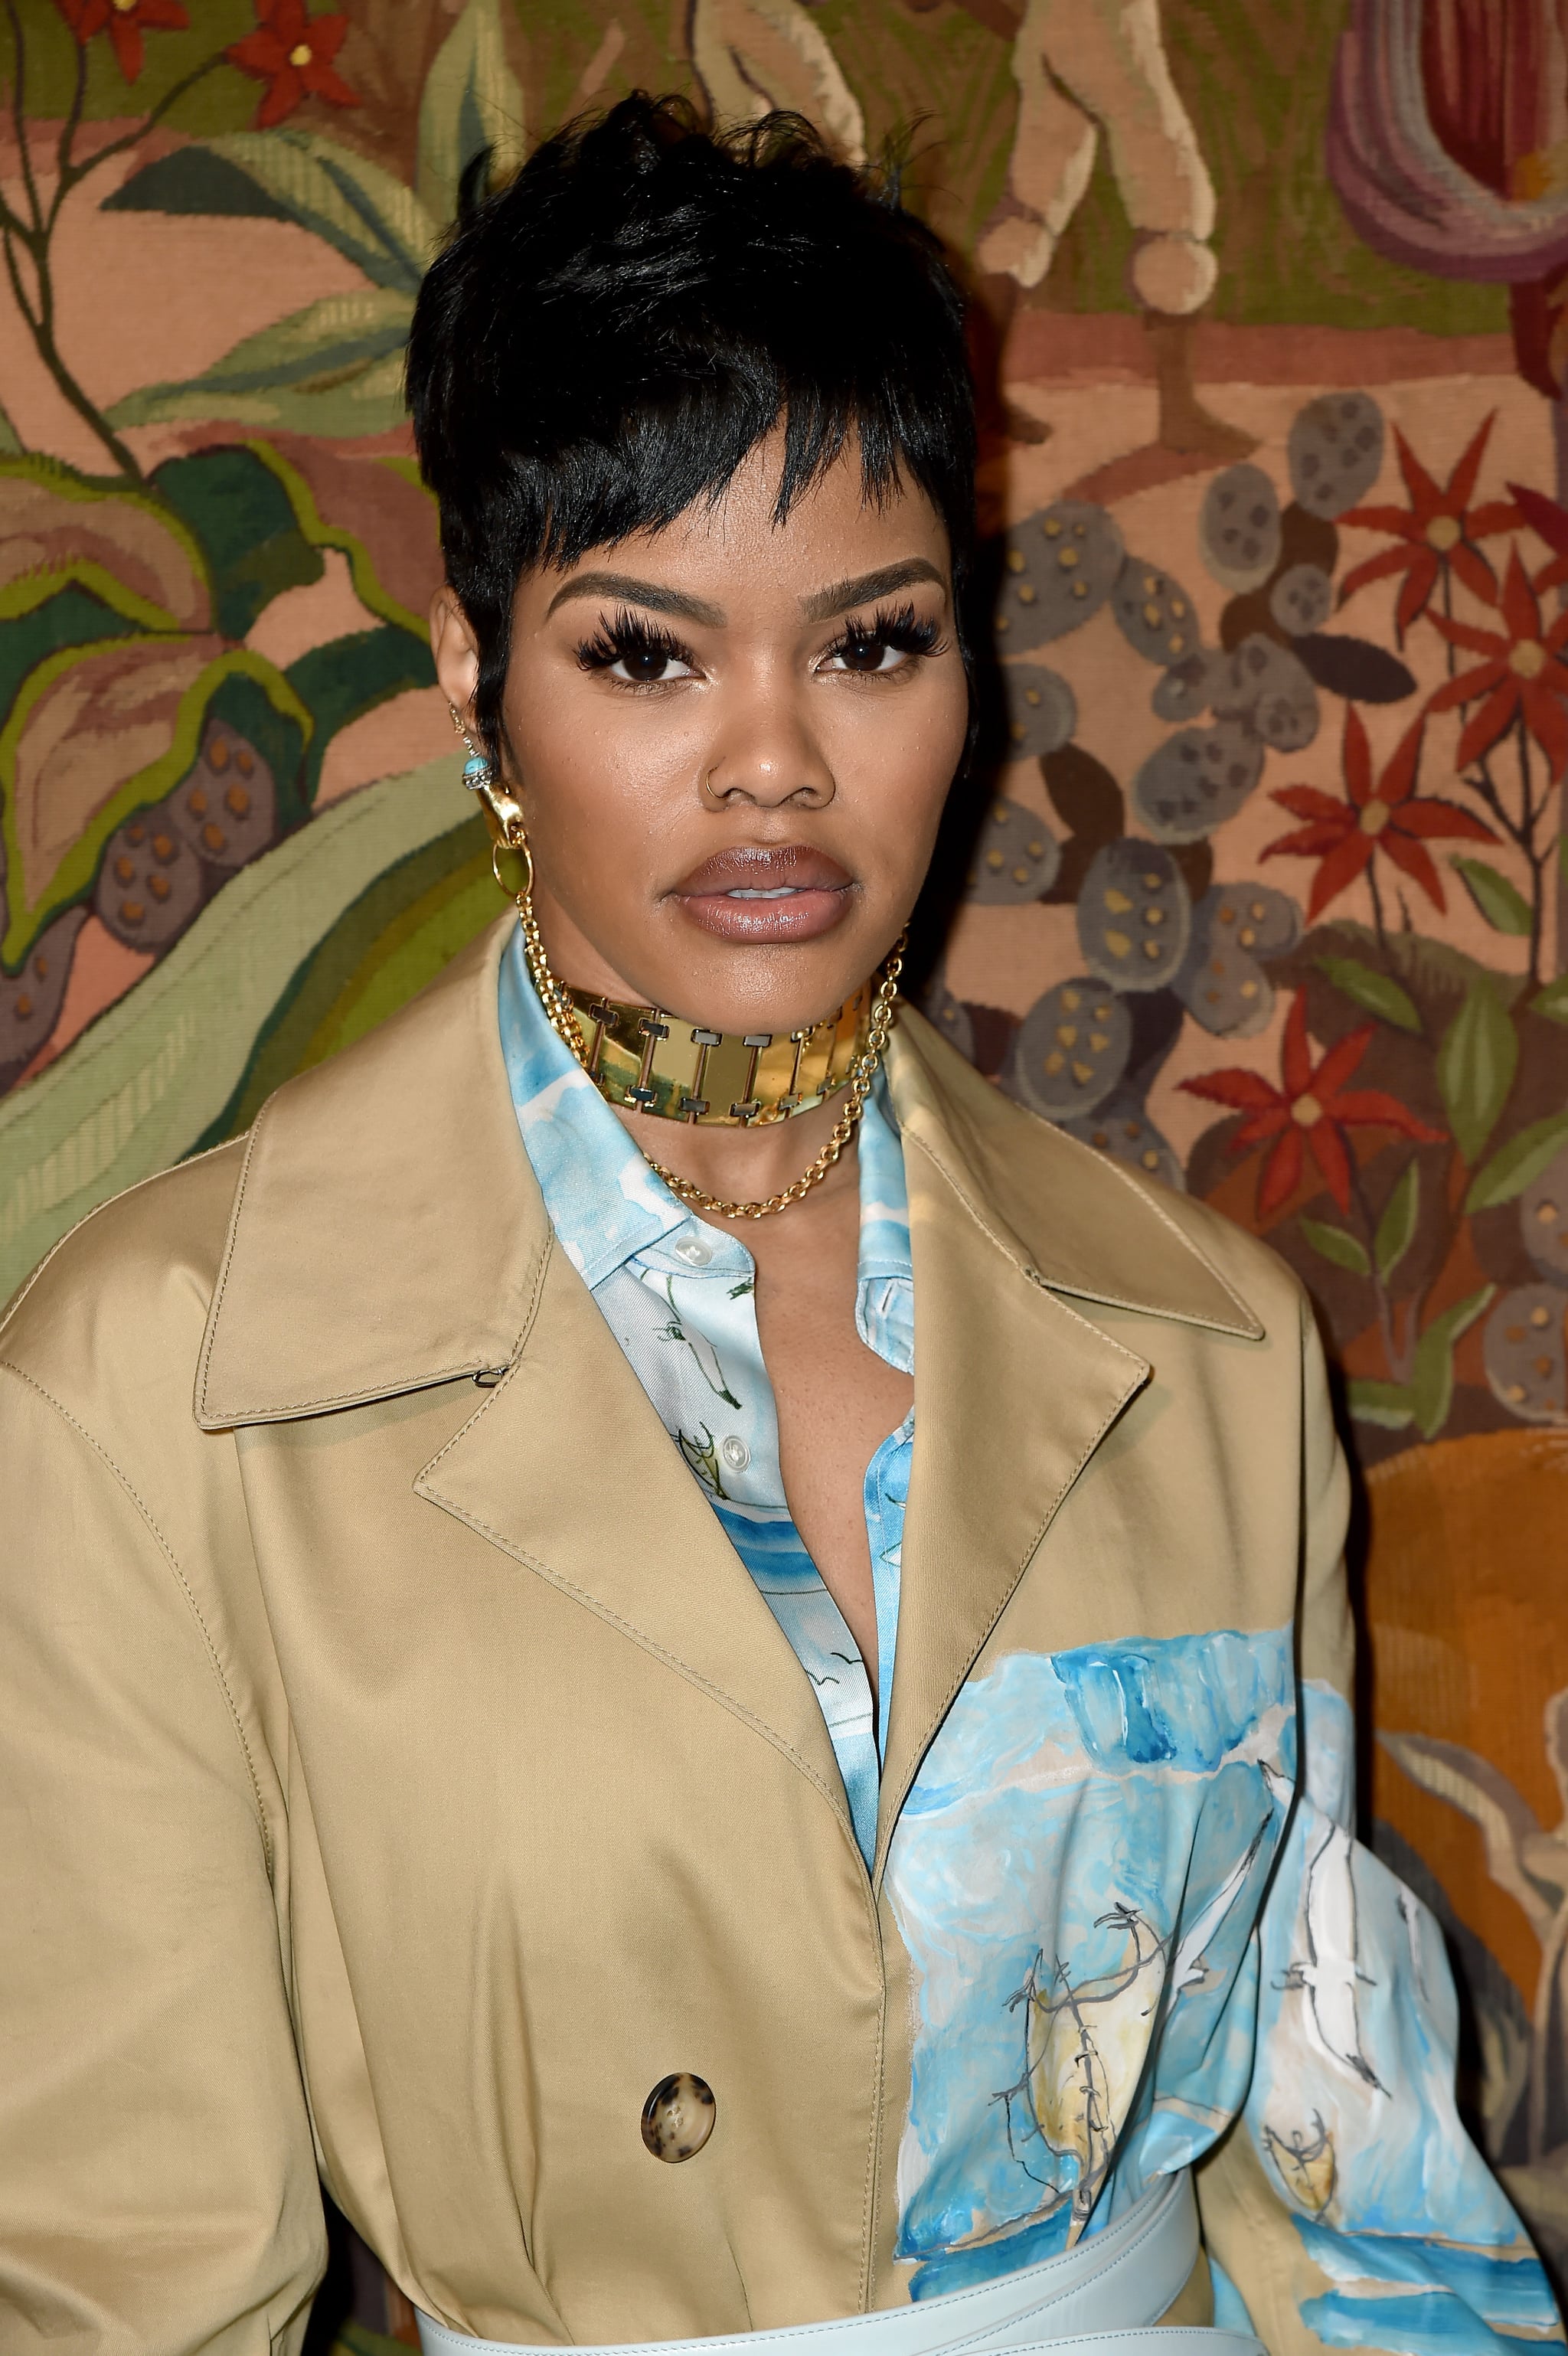 Teyana Taylor on the Beauty Lessons She Wants to Pass On "Makeup Can't